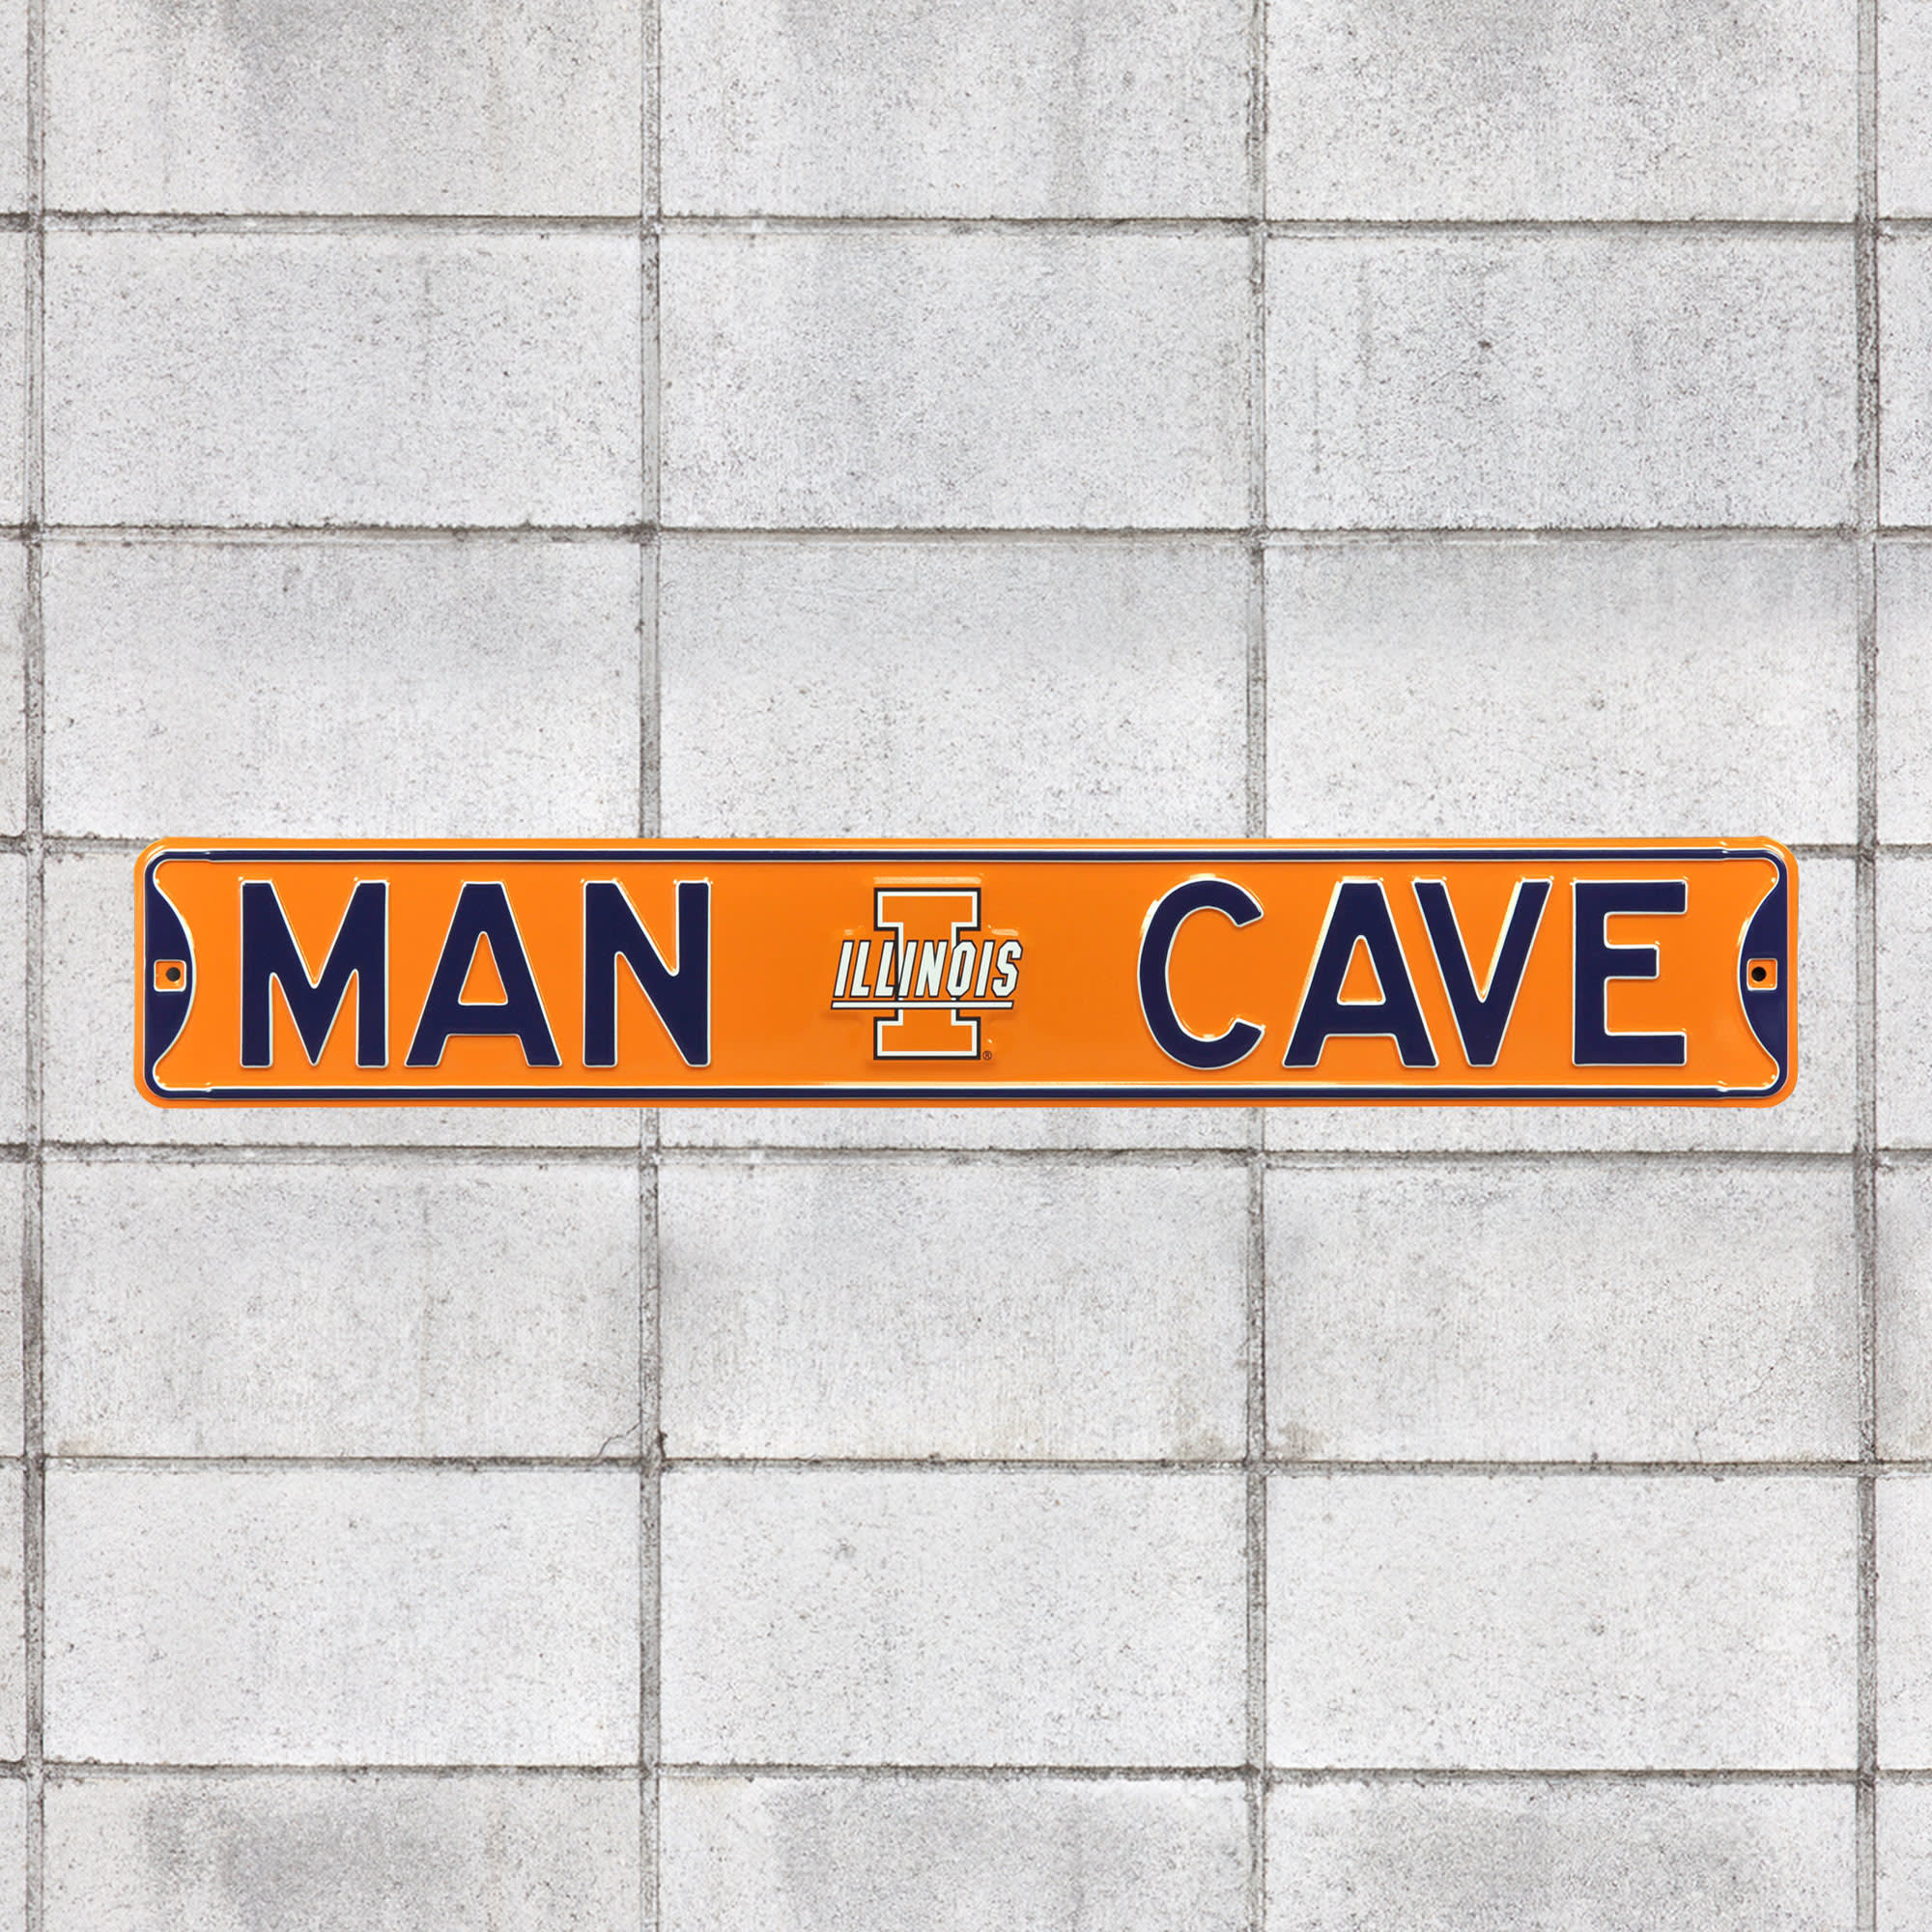 Illinois Fighting Illini: Man Cave - Officially Licensed Metal Street Sign 36.0"W x 6.0"H by Fathead | 100% Steel